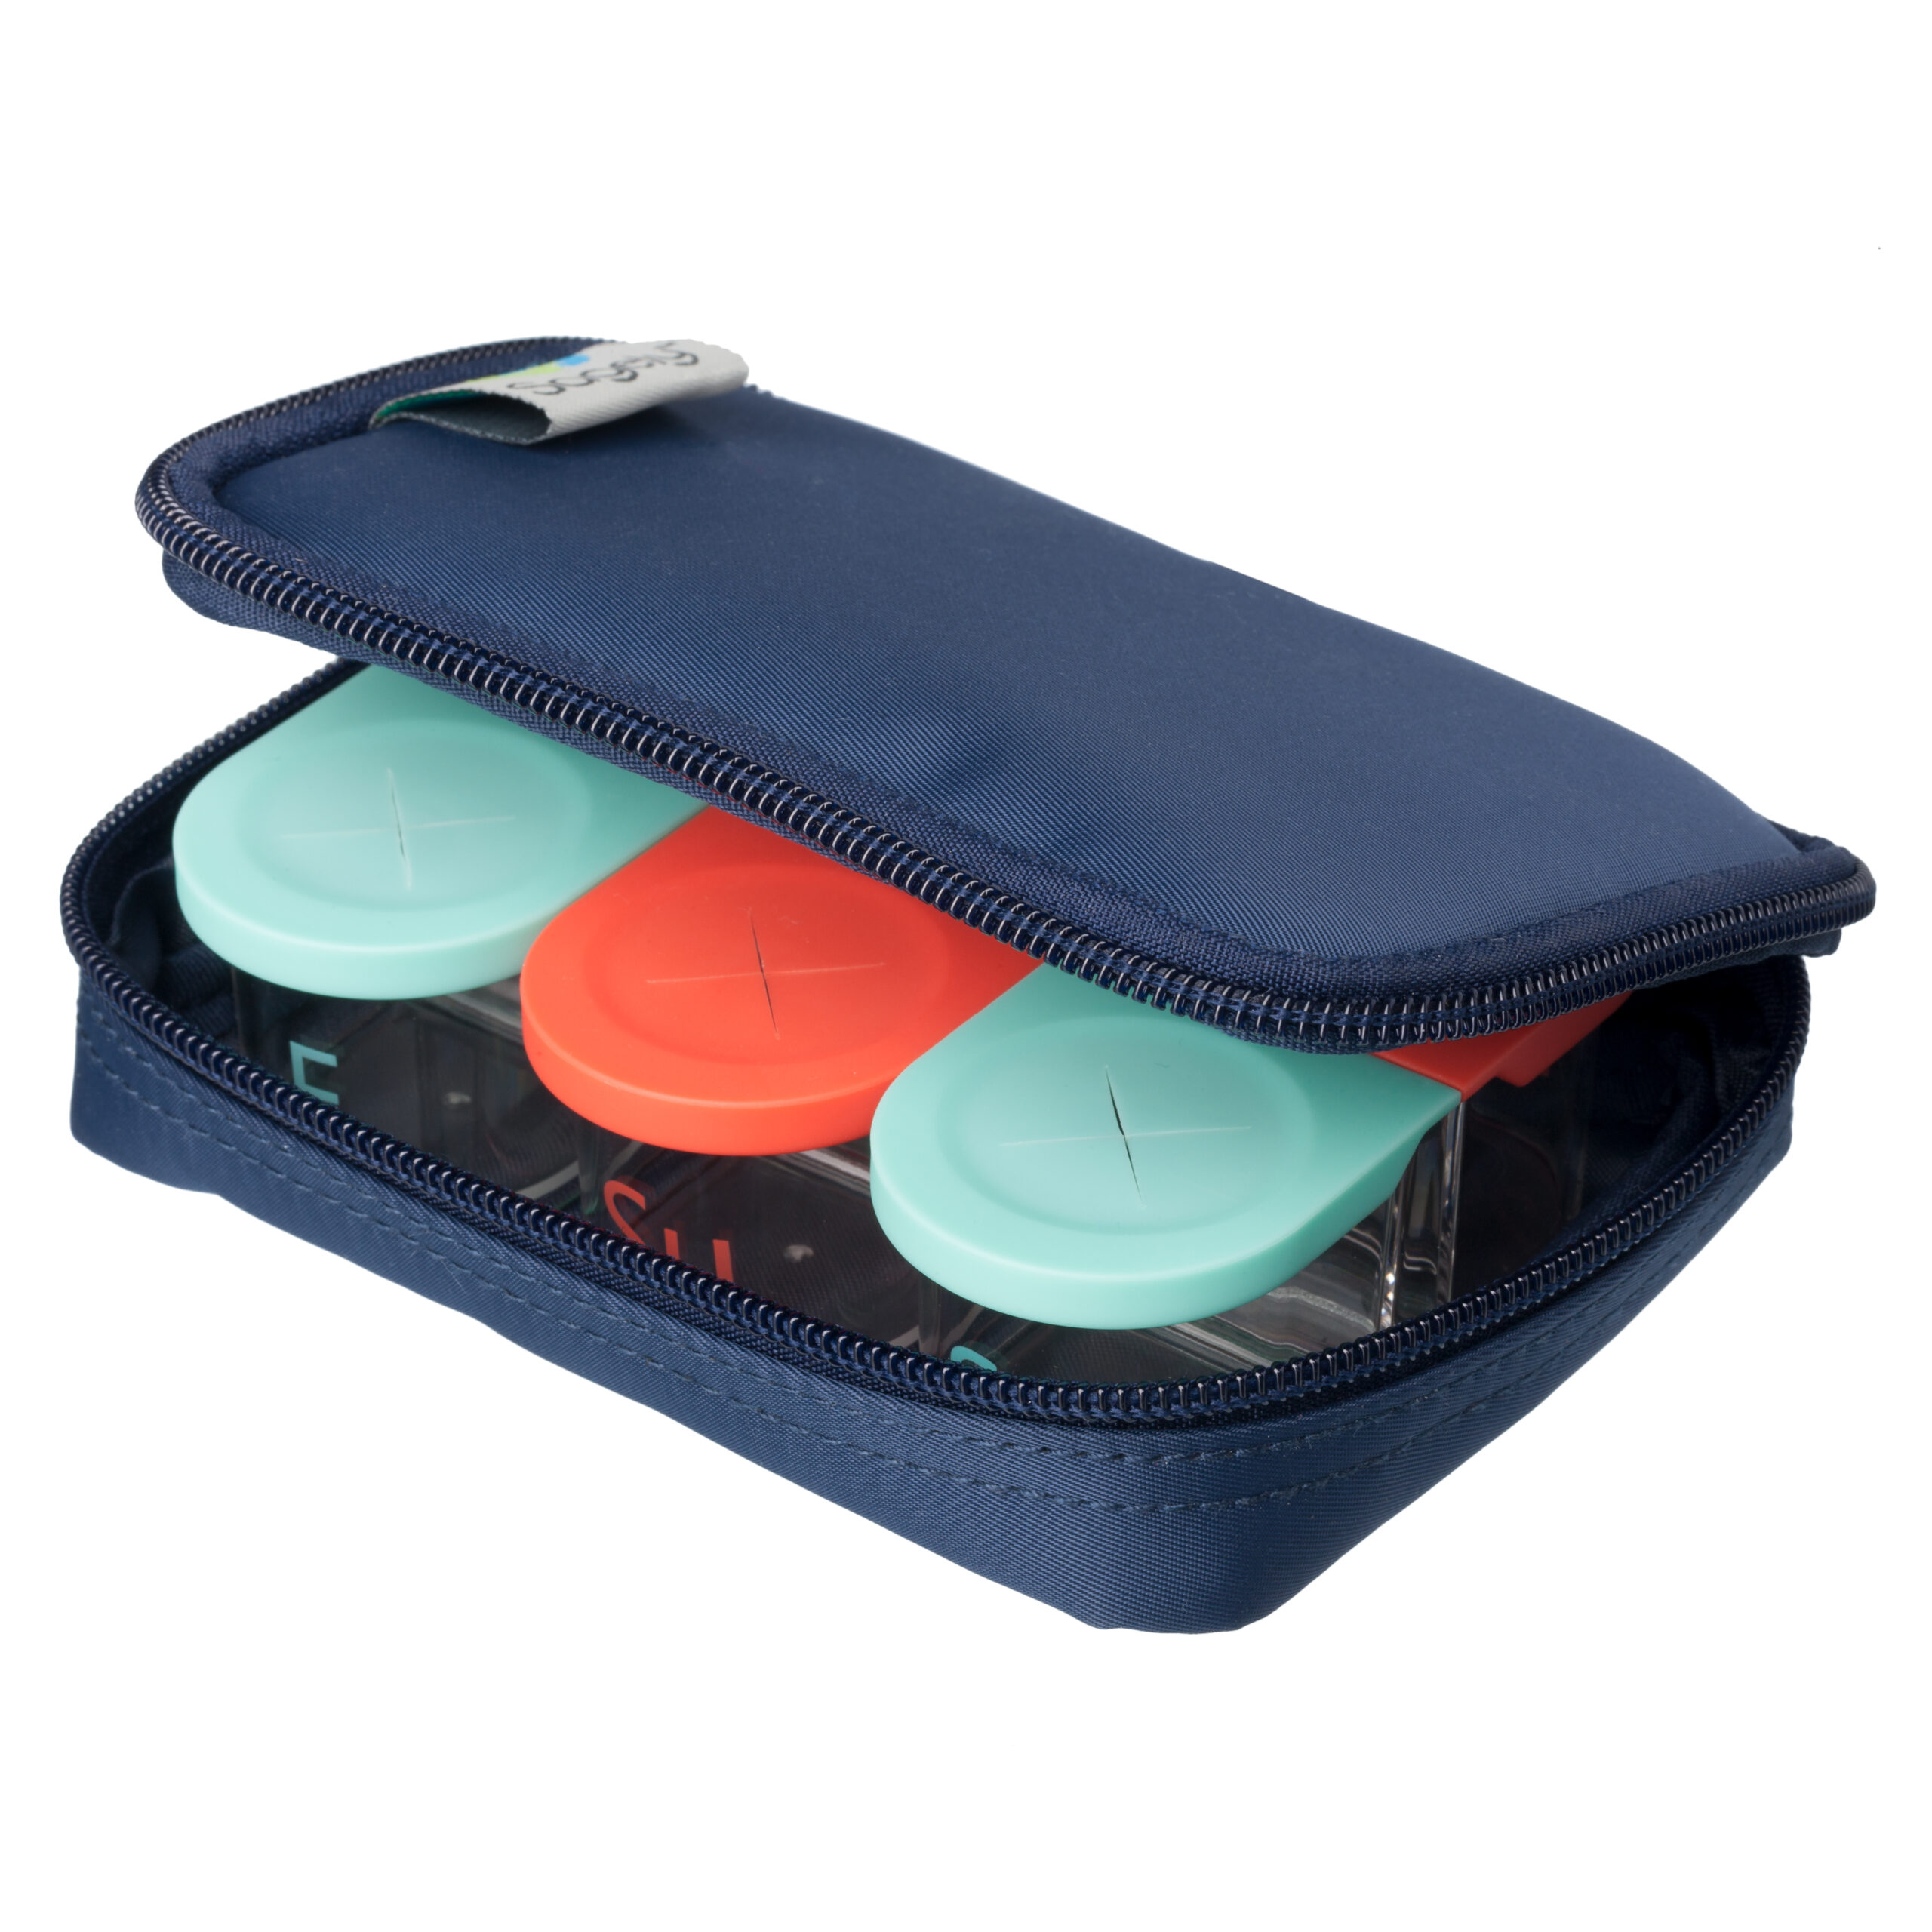 1pc Portable Pill Case Compact Pill Box Supplement Case For Pocket Or Purse  - 8 Grids Travel Medication Carry Case - Daily Vitamin Organizer Box,  Medicine Container | SHEIN EUQS